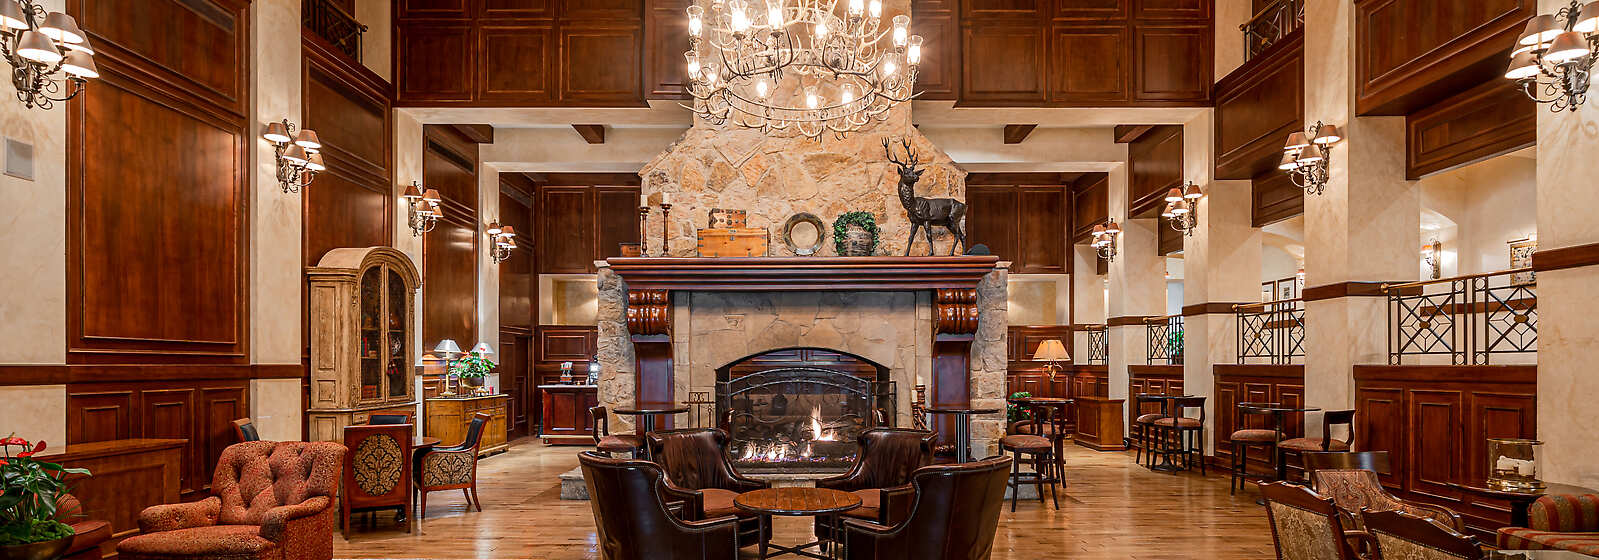 Located in the heart of Houston, The Houstonian Hotel, Club & Spa is a Forbes Travel Guide Four-Star, secluded retreat.